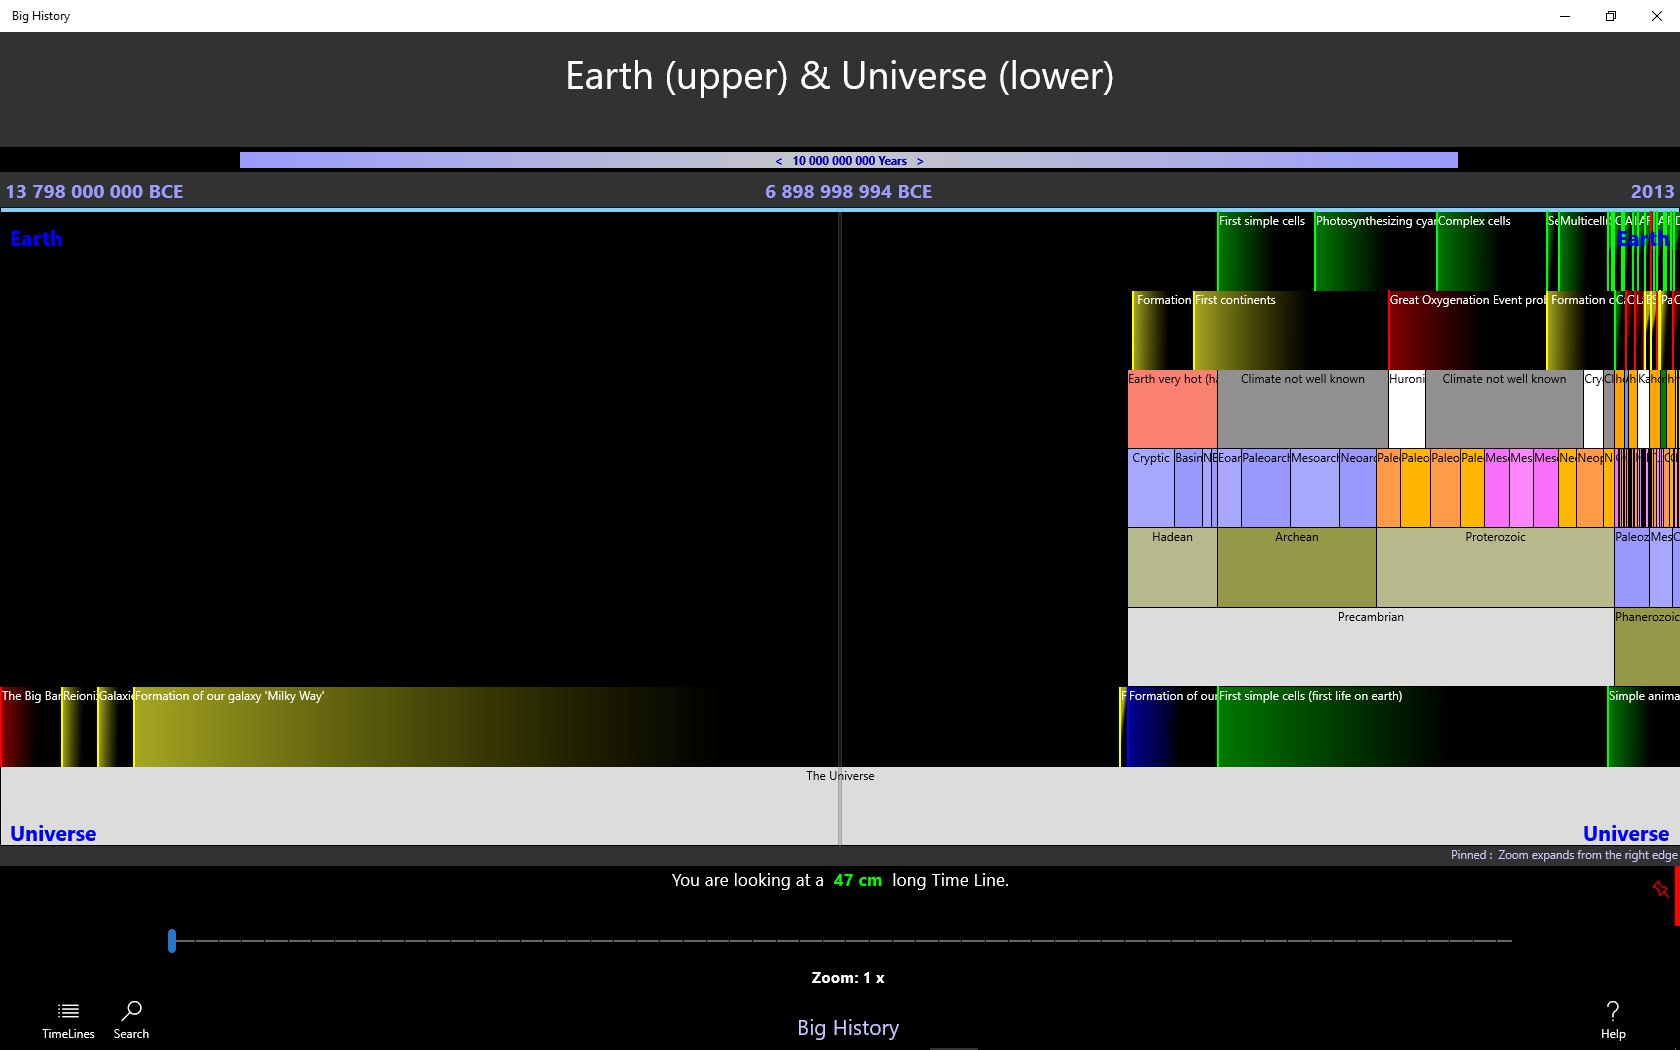 Two timelines: “Universe” and “Earth”